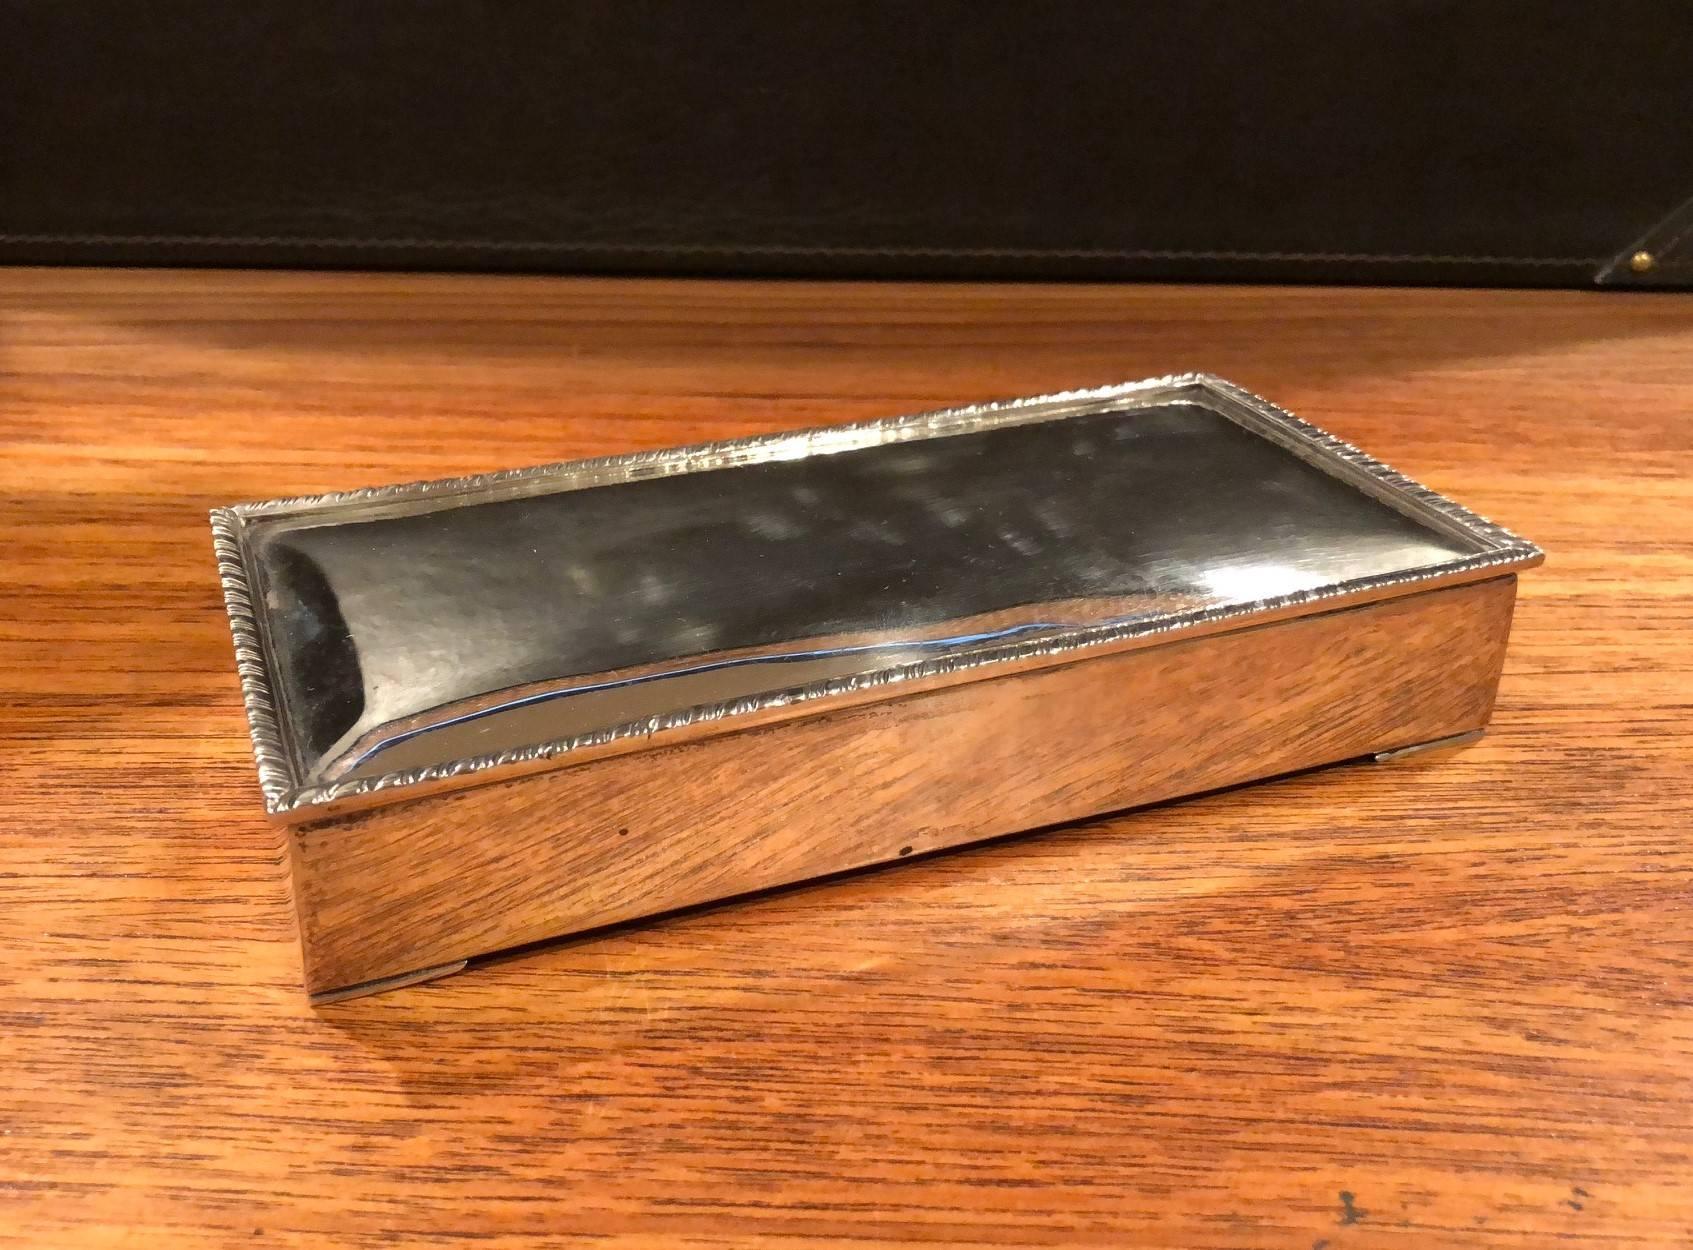 Vintage sterling silver, wood-lined cigarette box from circa 1950s measuring 8